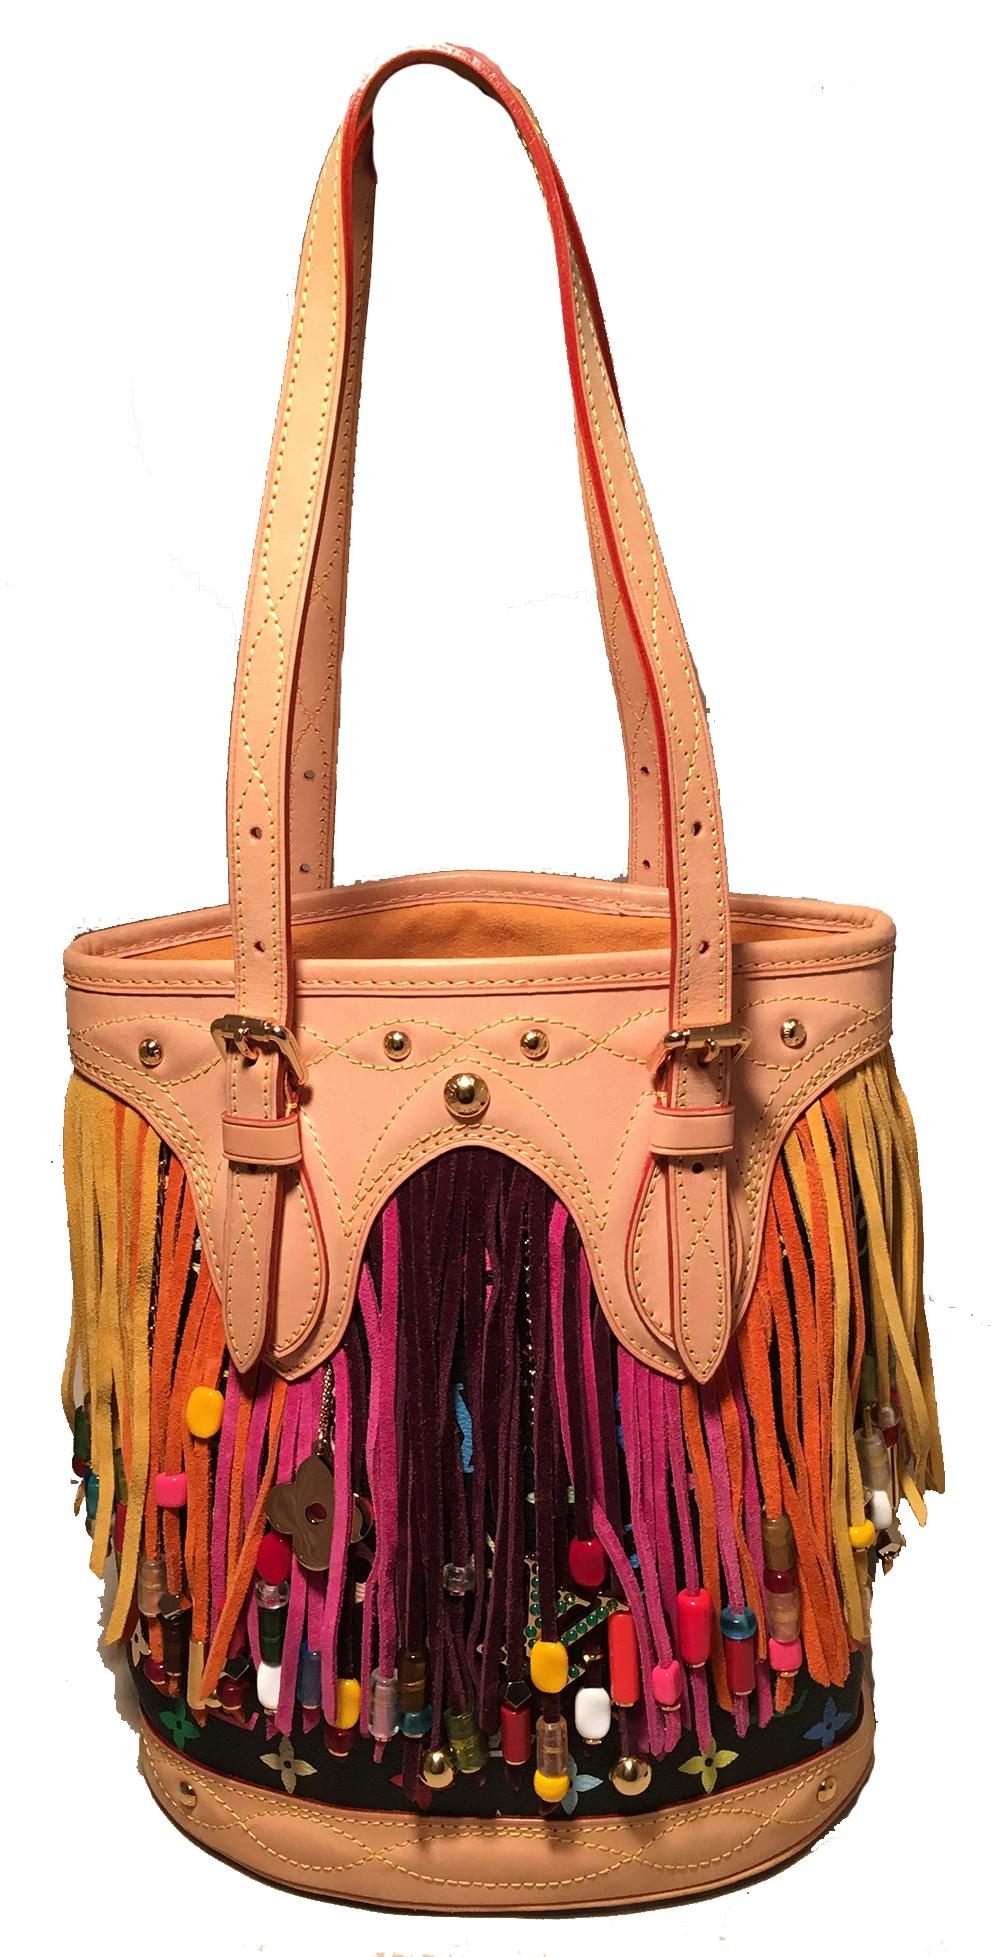 Louis Vuitton Limited Edition Black Monogram Multicolor Fringe Bucket Bag with Pouch in excellent condition. Black multicolor monogram canvas trimmed with tan leather and gold hardware and multicolor suede fringe with charm details. Interior lined